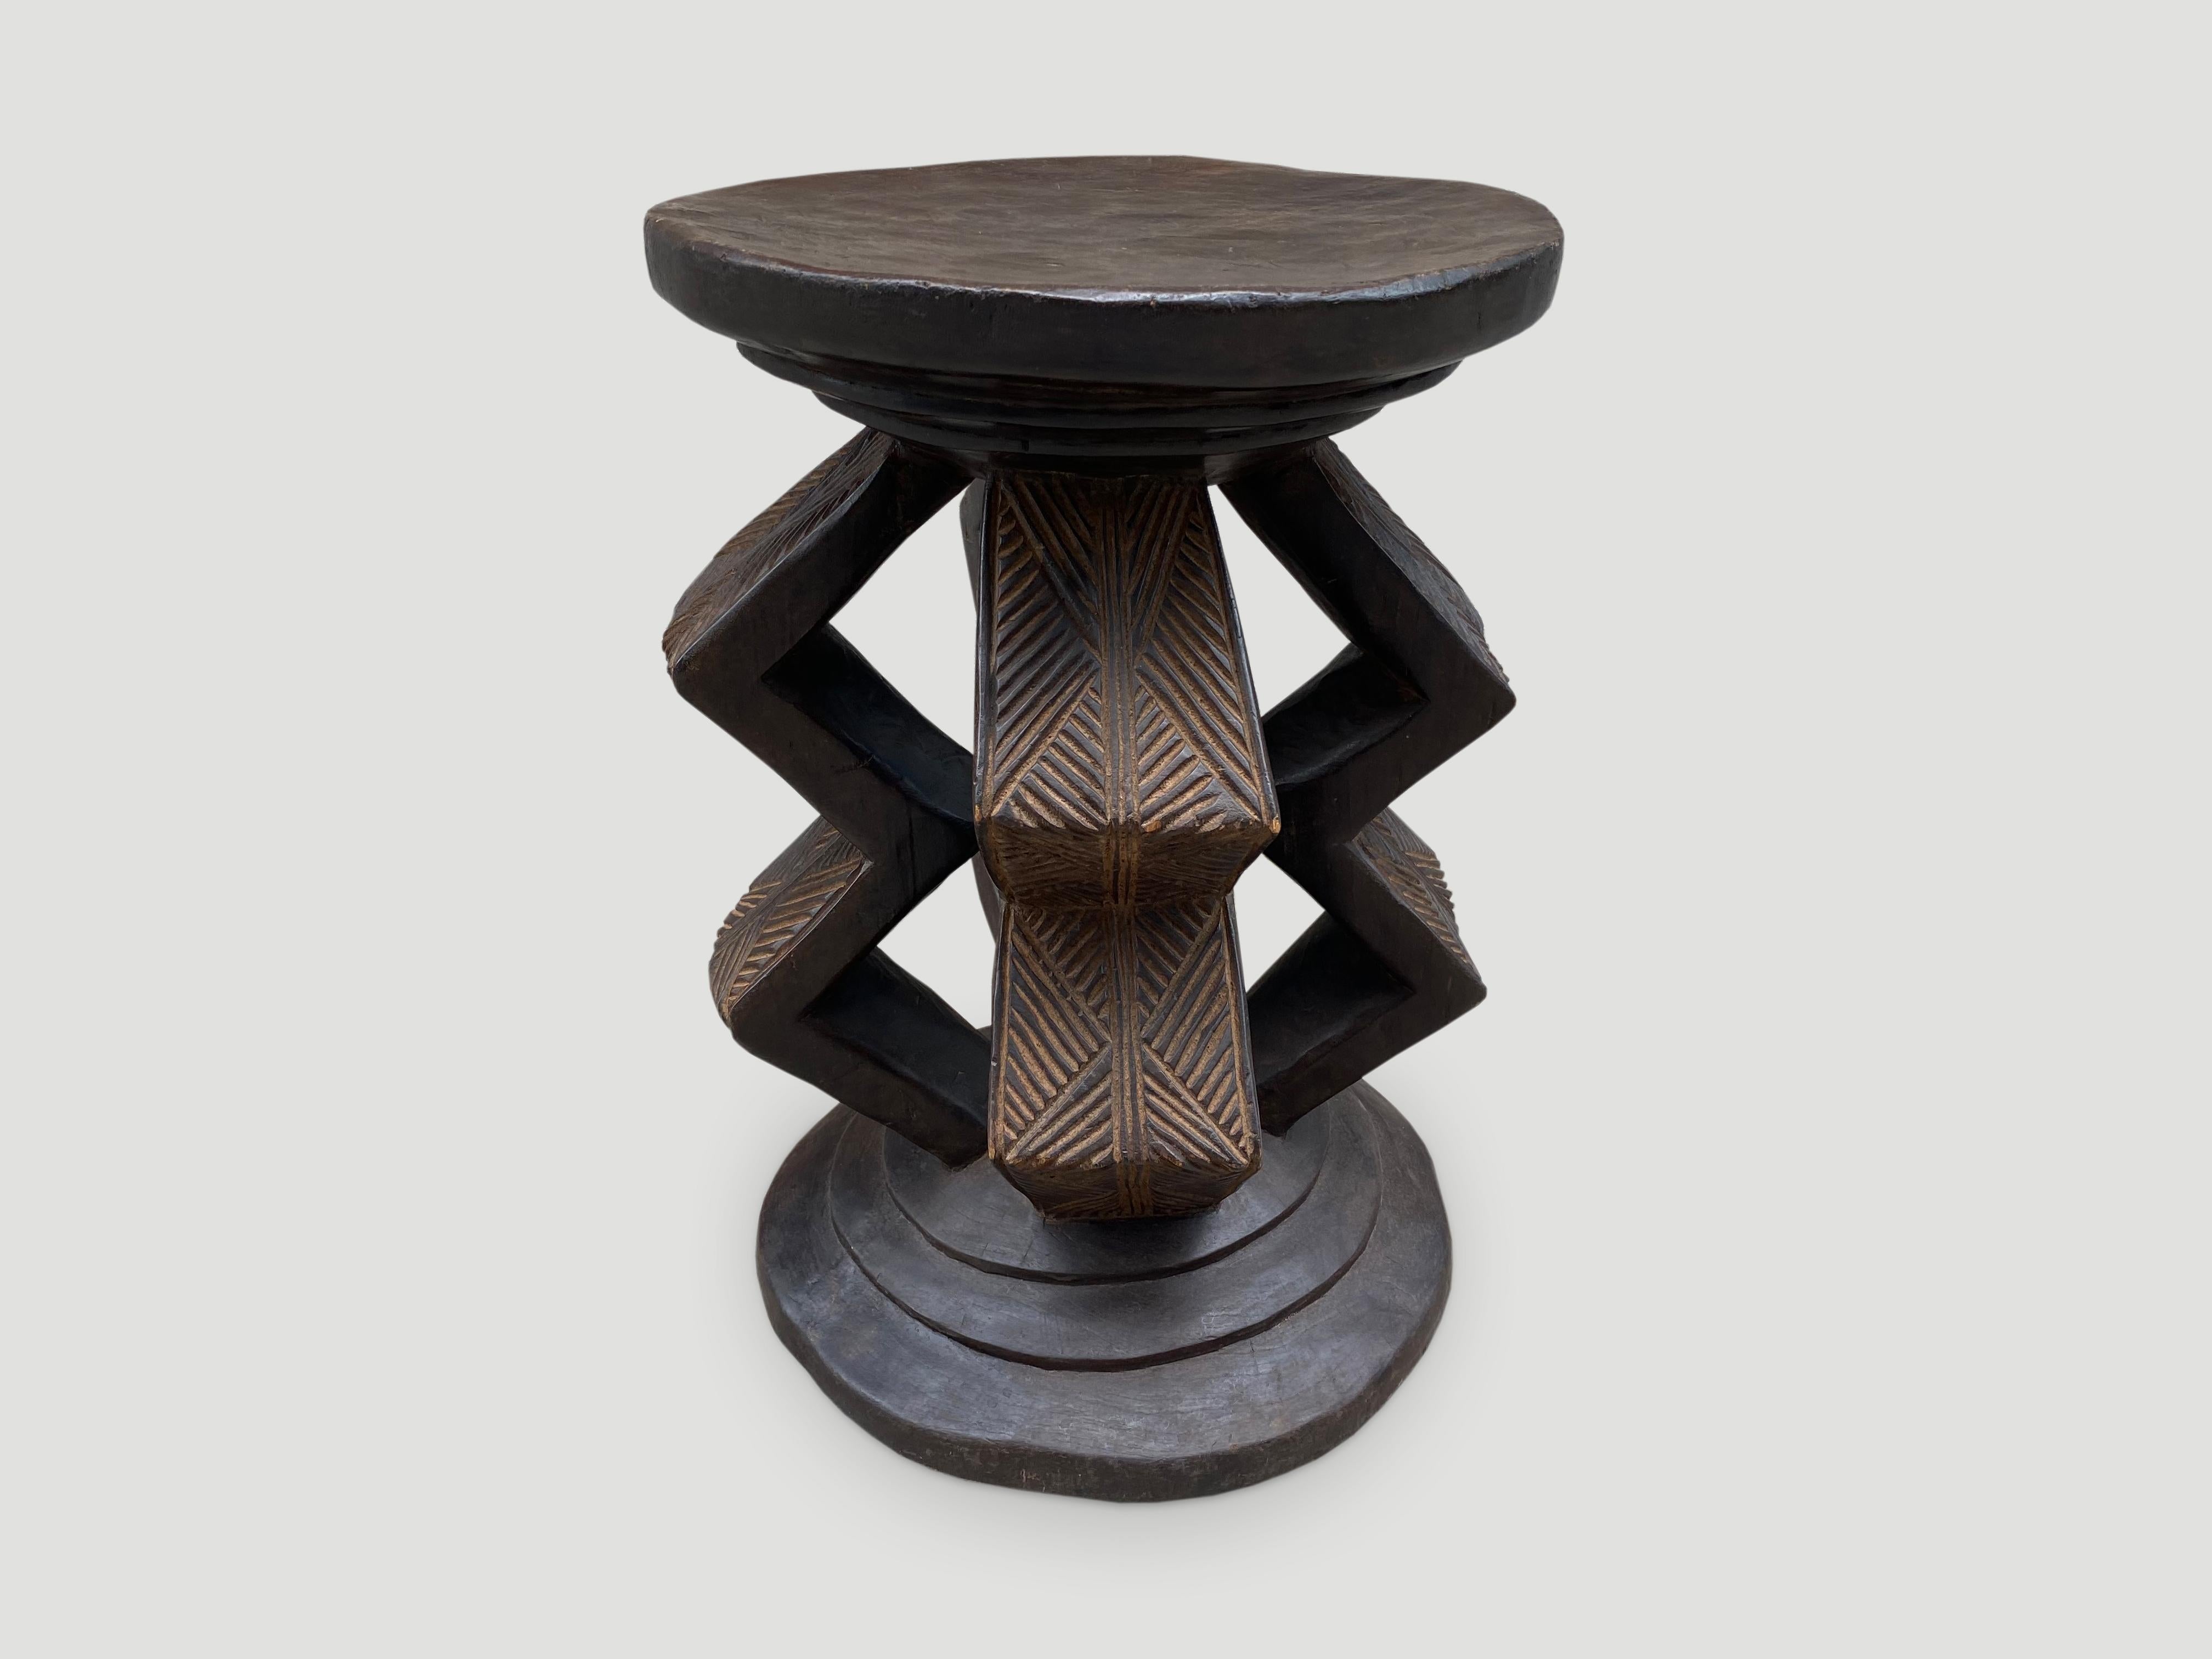 Beautiful hand carved African side table or pedestal. Rare large scale, hand carved out of a single block of mahogany wood. We only source the best.

This side table or pedestal was sourced in the spirit of wabi-sabi, a Japanese philosophy that